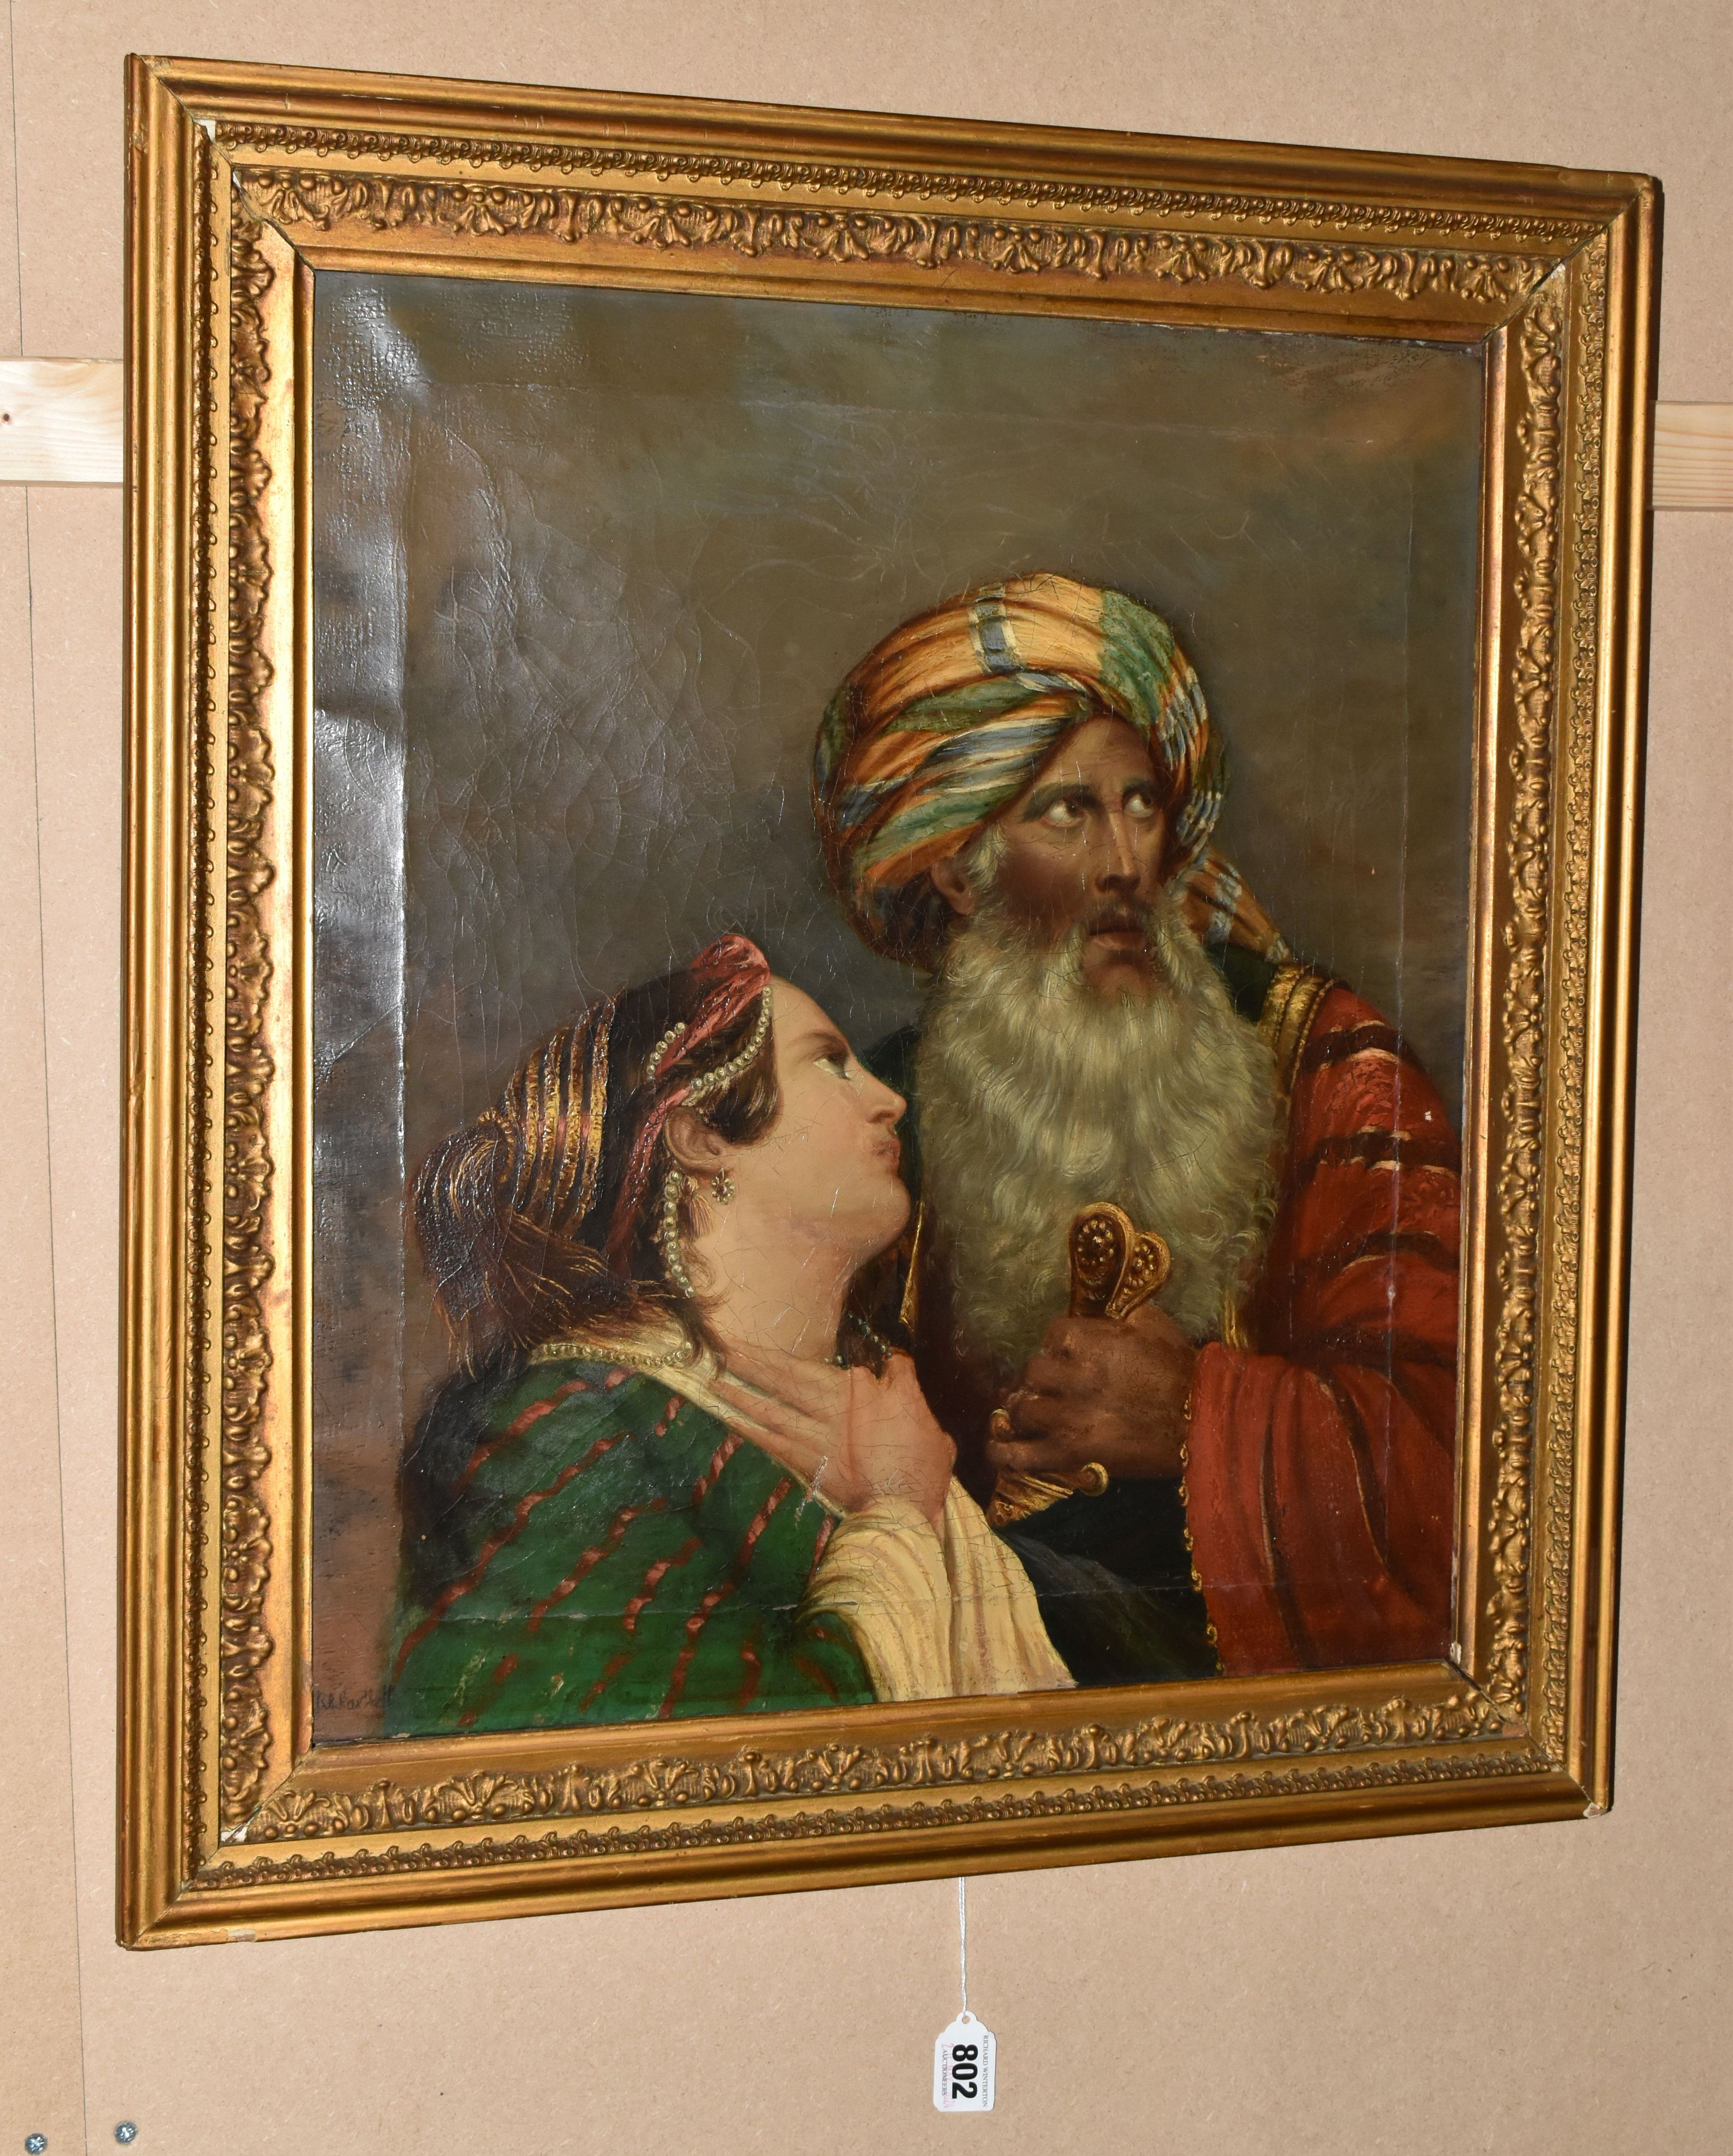 R. A. BARTLETT (19TH CENTURY) AN ORIENTALISM PORTRAIT, depicting a male figure with colourful turban